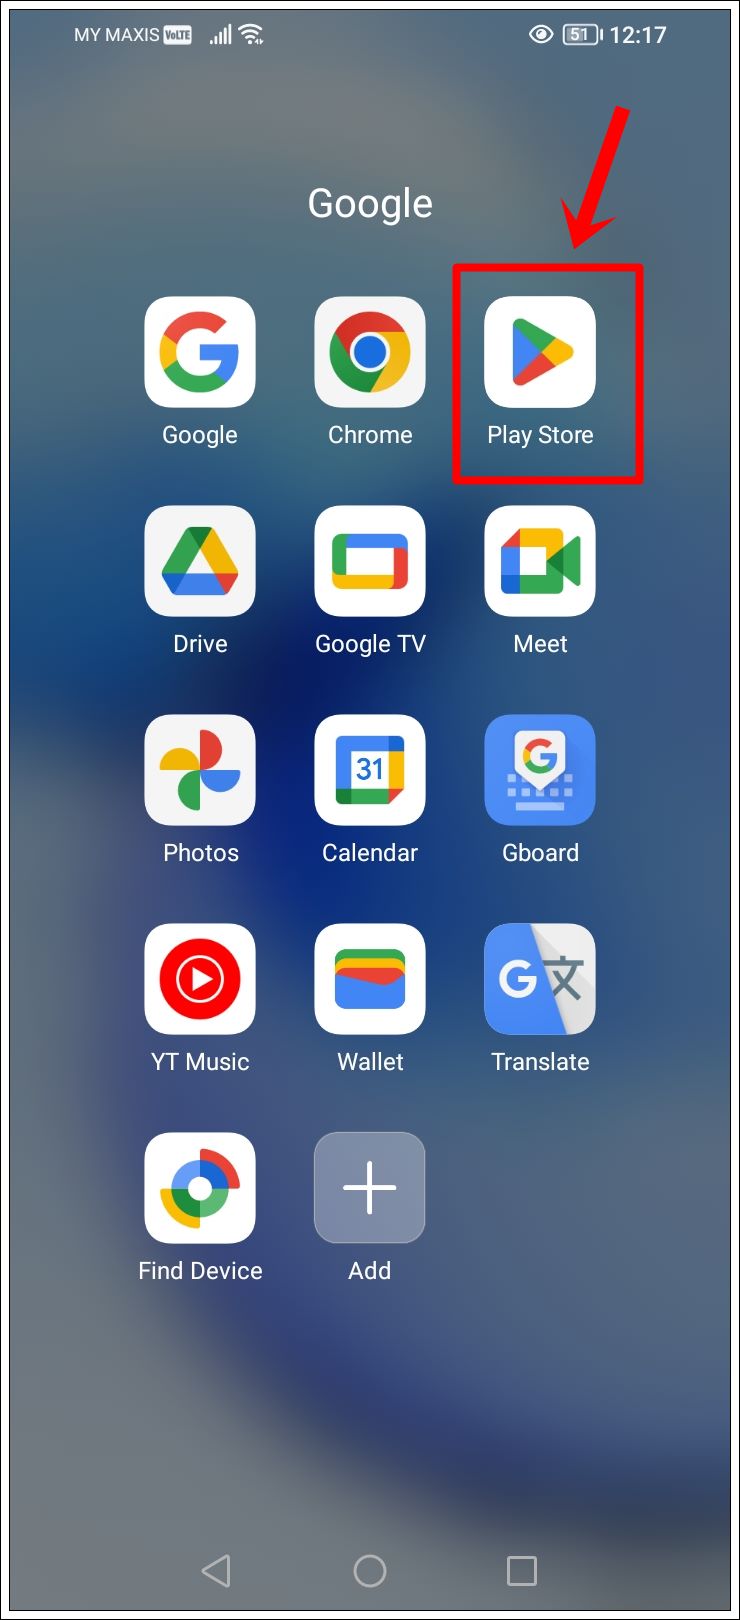 This image shows a screenshot of an Android phone with the 'Google Play Store' icon highlighted.